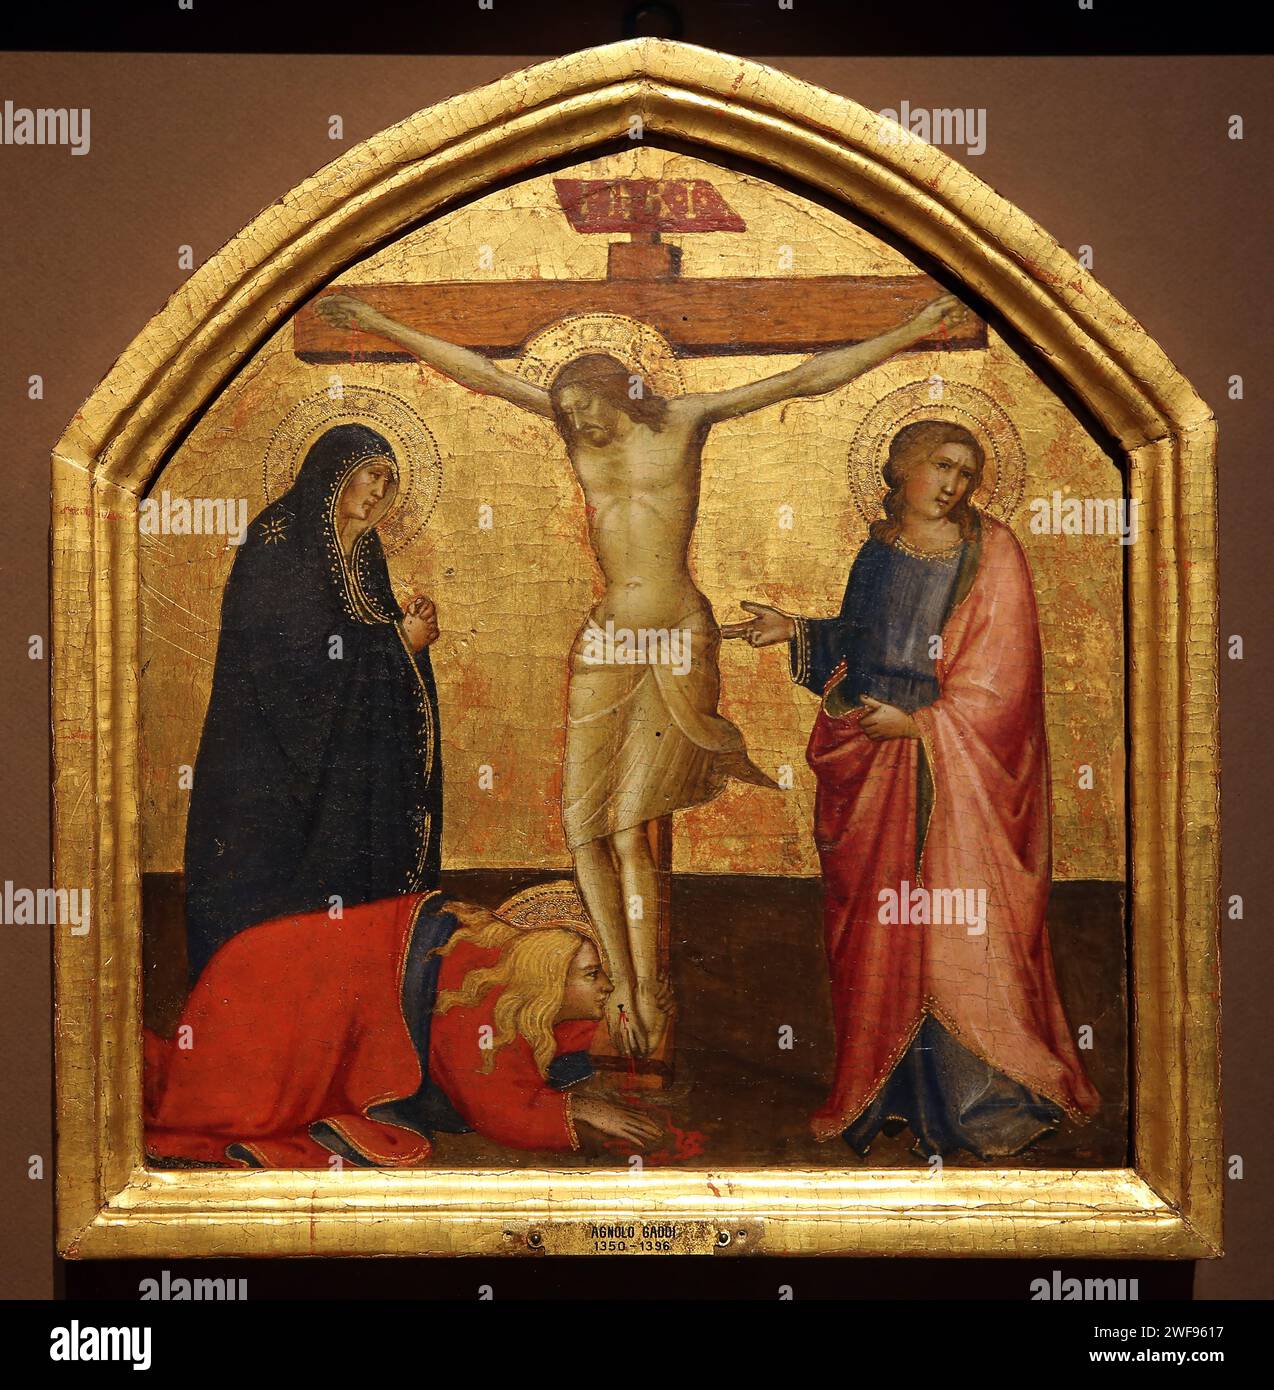 The Crucifizion, c. 1390 by Angolo Gaddi. Tempera and gold on panel. Thyssen Museum. Madrid. Spain. Stock Photo